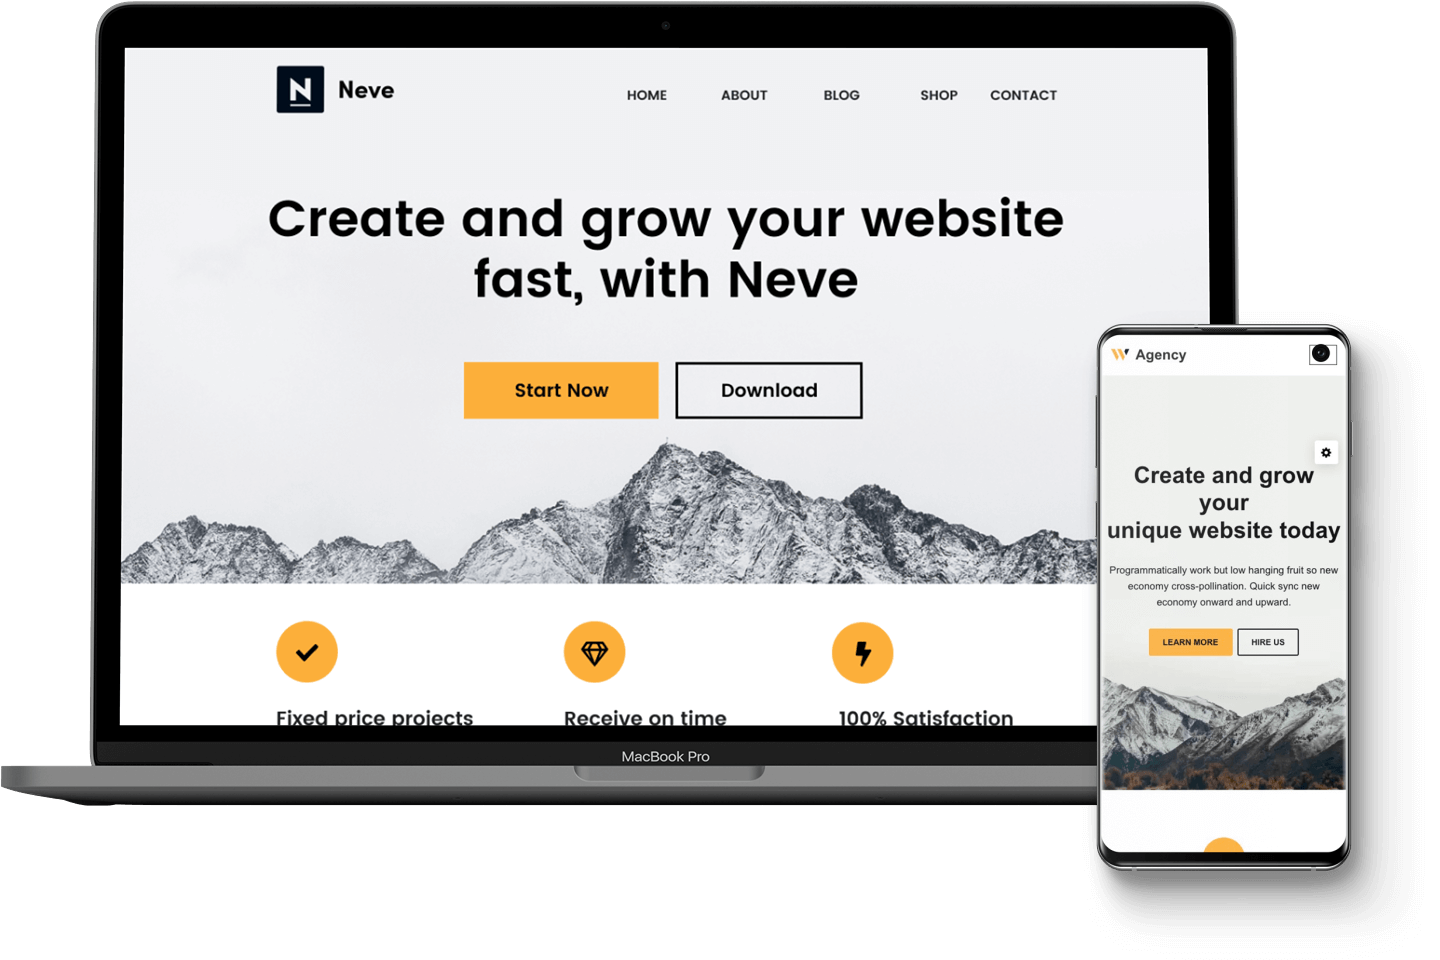 Neve offers a mobile-first approach